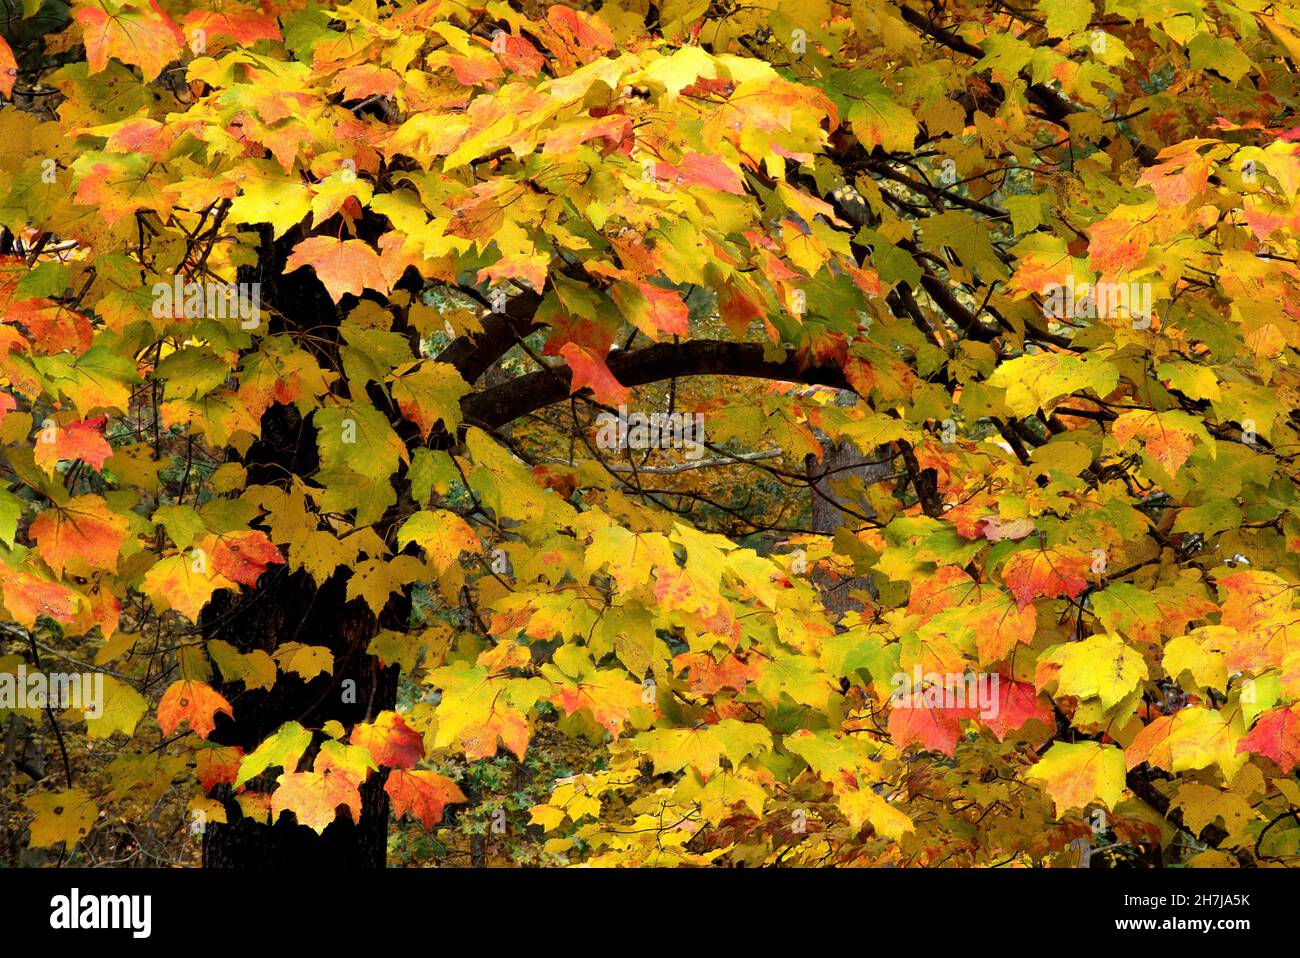 Seasonal changes. Branches of old maple tree with colorful leaves changing to autumn hues of yellow, orange and red. Stock Photo